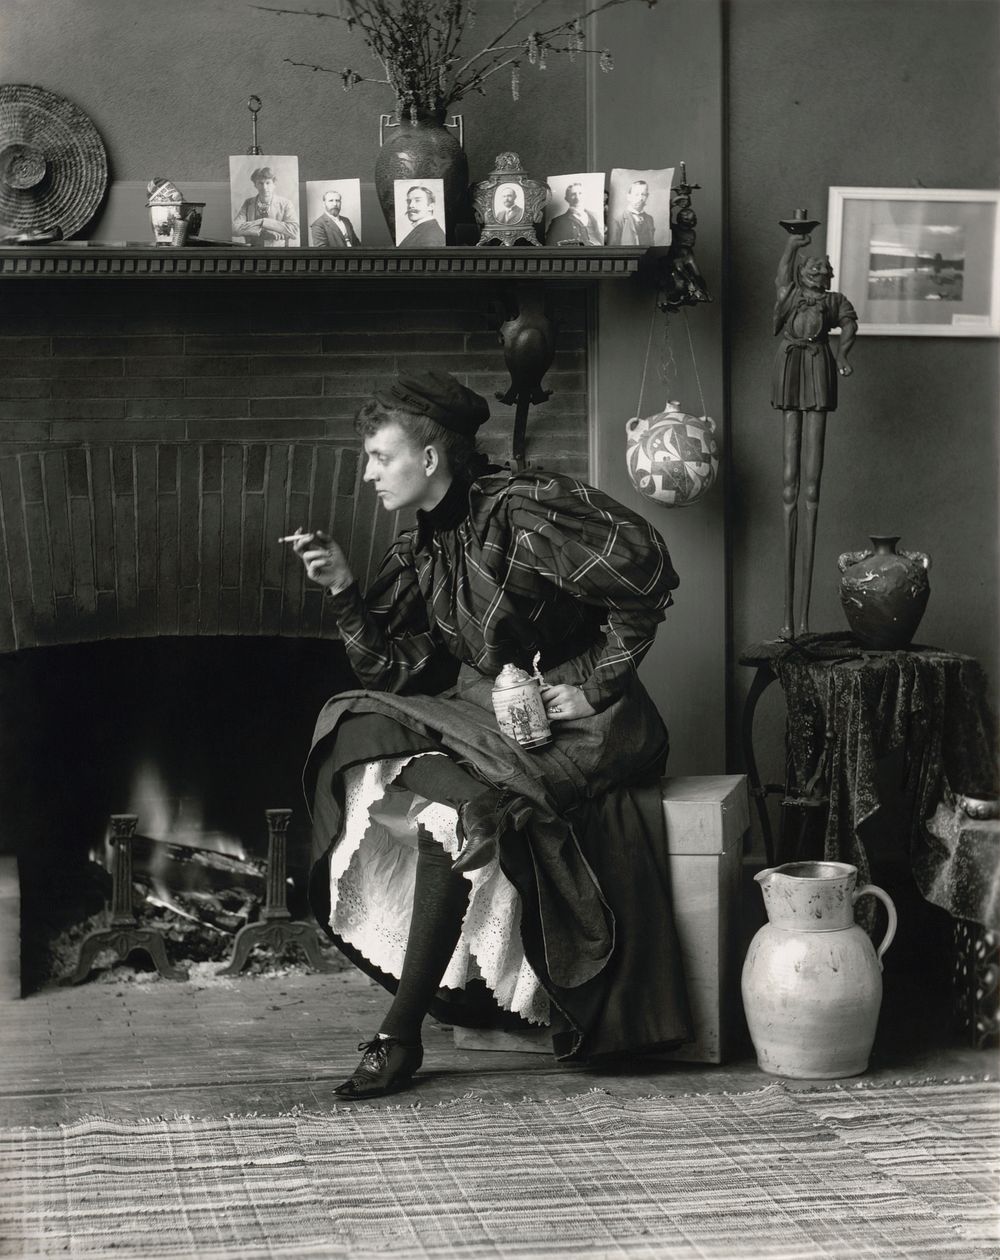 Frances Benjamin Johnston's Self-Portrait (as "New Woman"), a full-length self-portrait of her seated in front of fireplace…